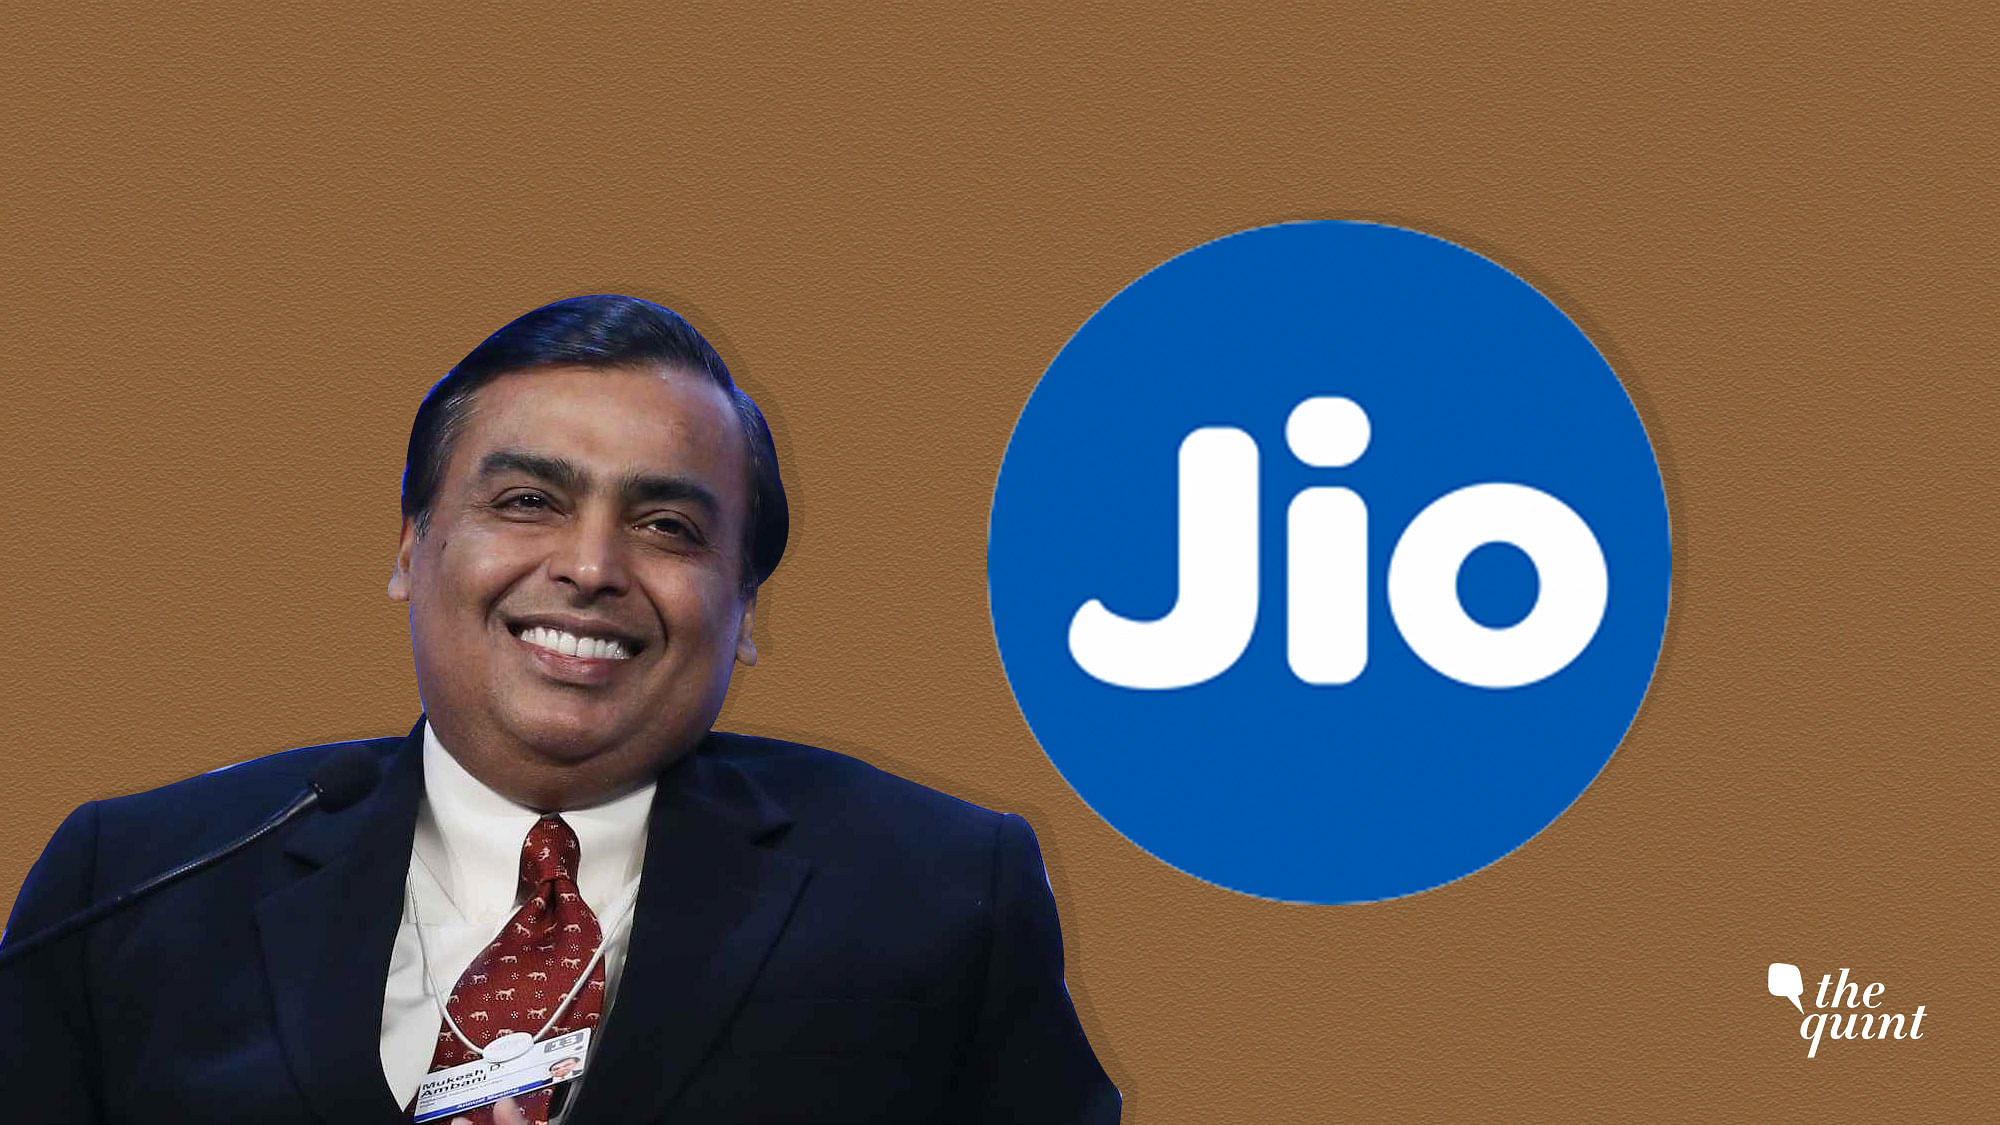  Jio has managed to double its user base over the past 12 months, Mukesh Ambani announced.  